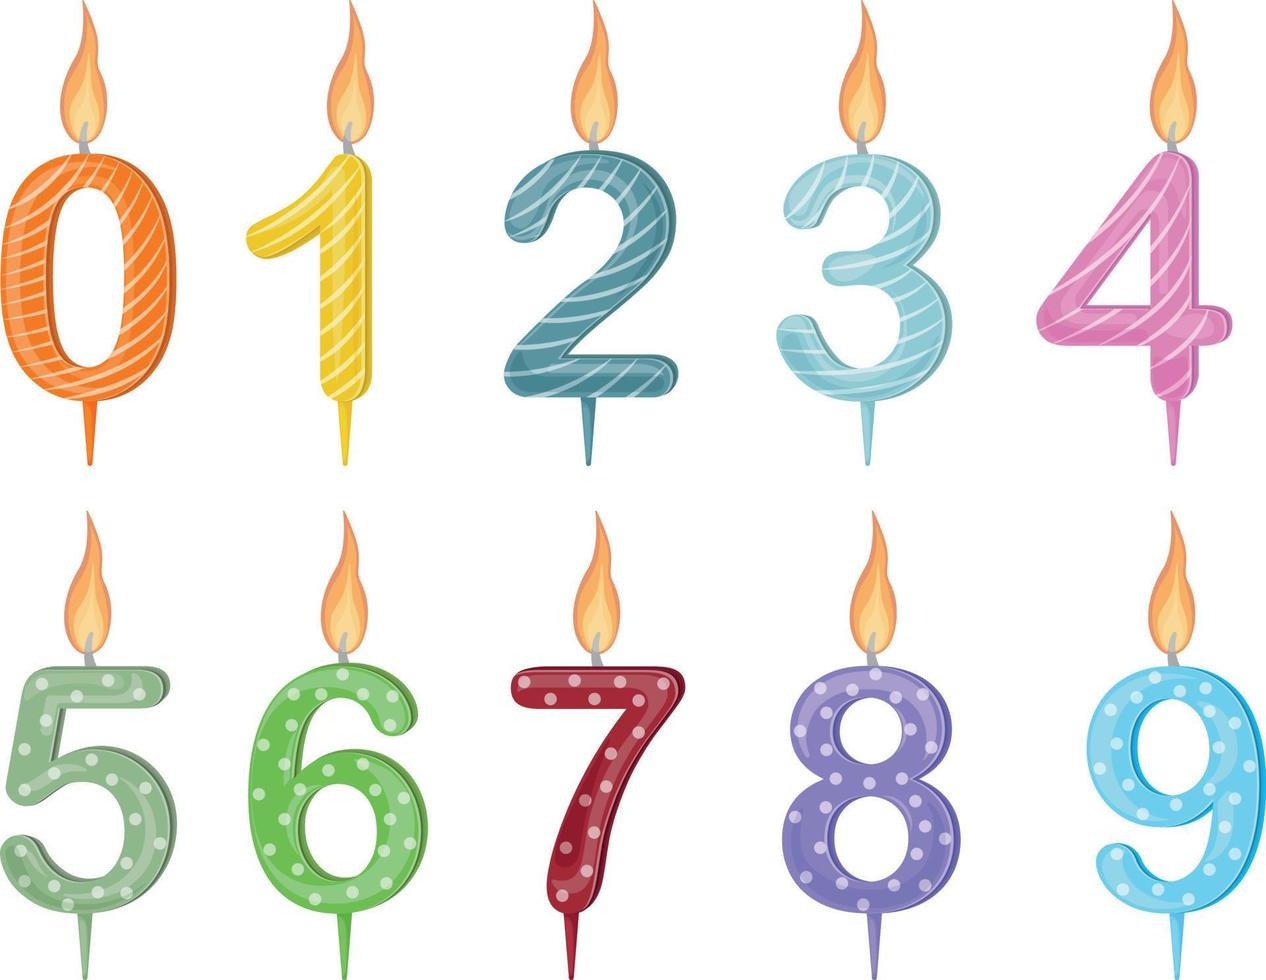 Candles figures for the cake. Colorful festive candles in the form of numbers, for cake decoration. Bright accessories for the holiday. Vector illustration